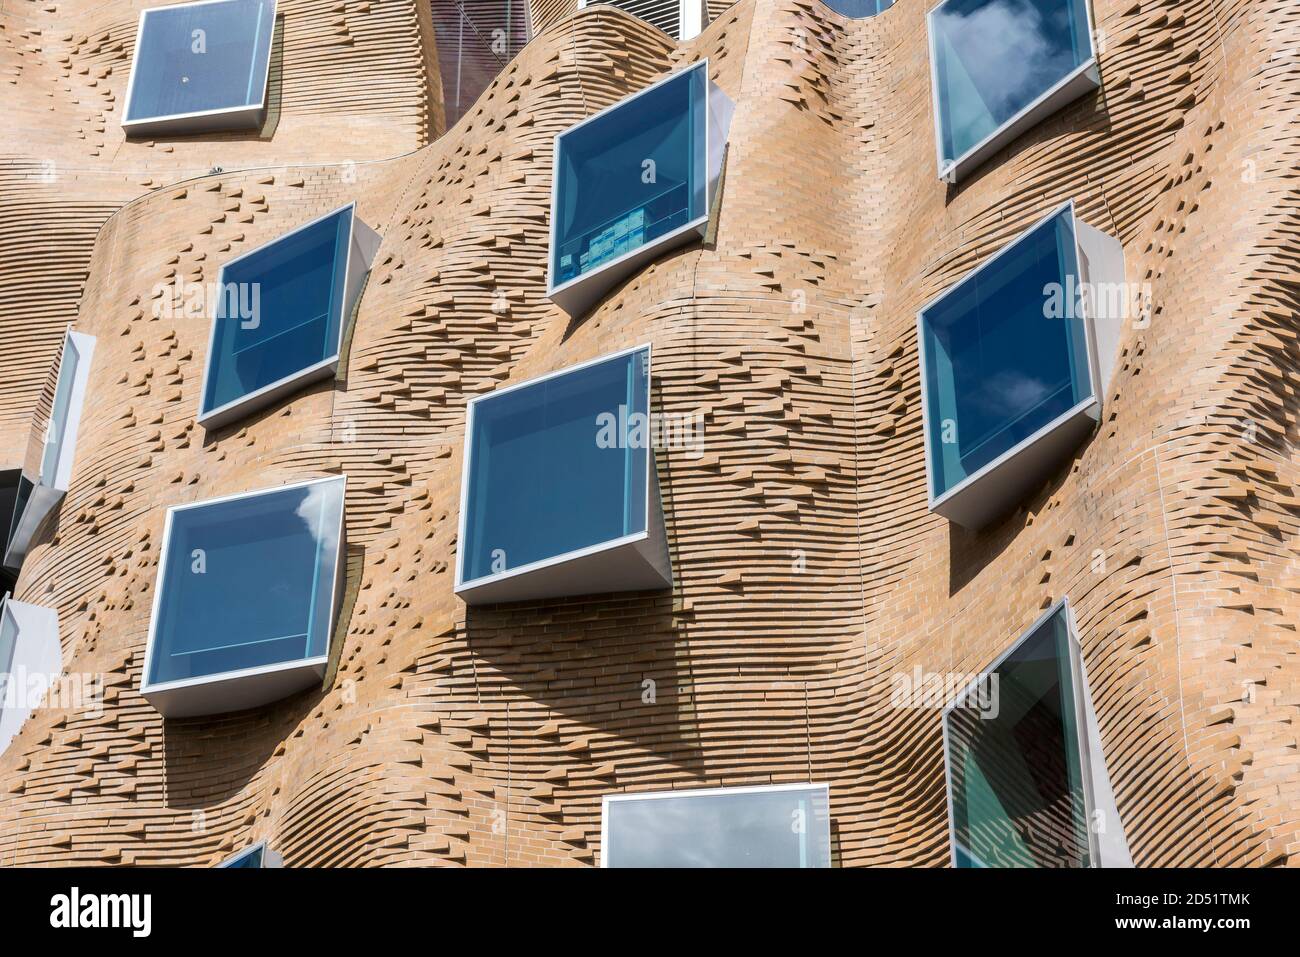 Detail view of undulating brick wall. Dr Chau Chak Wing Building, UTS Business School, Sydney, Australia. Architect: Gehry Partners, LLP, 2015. Stock Photo